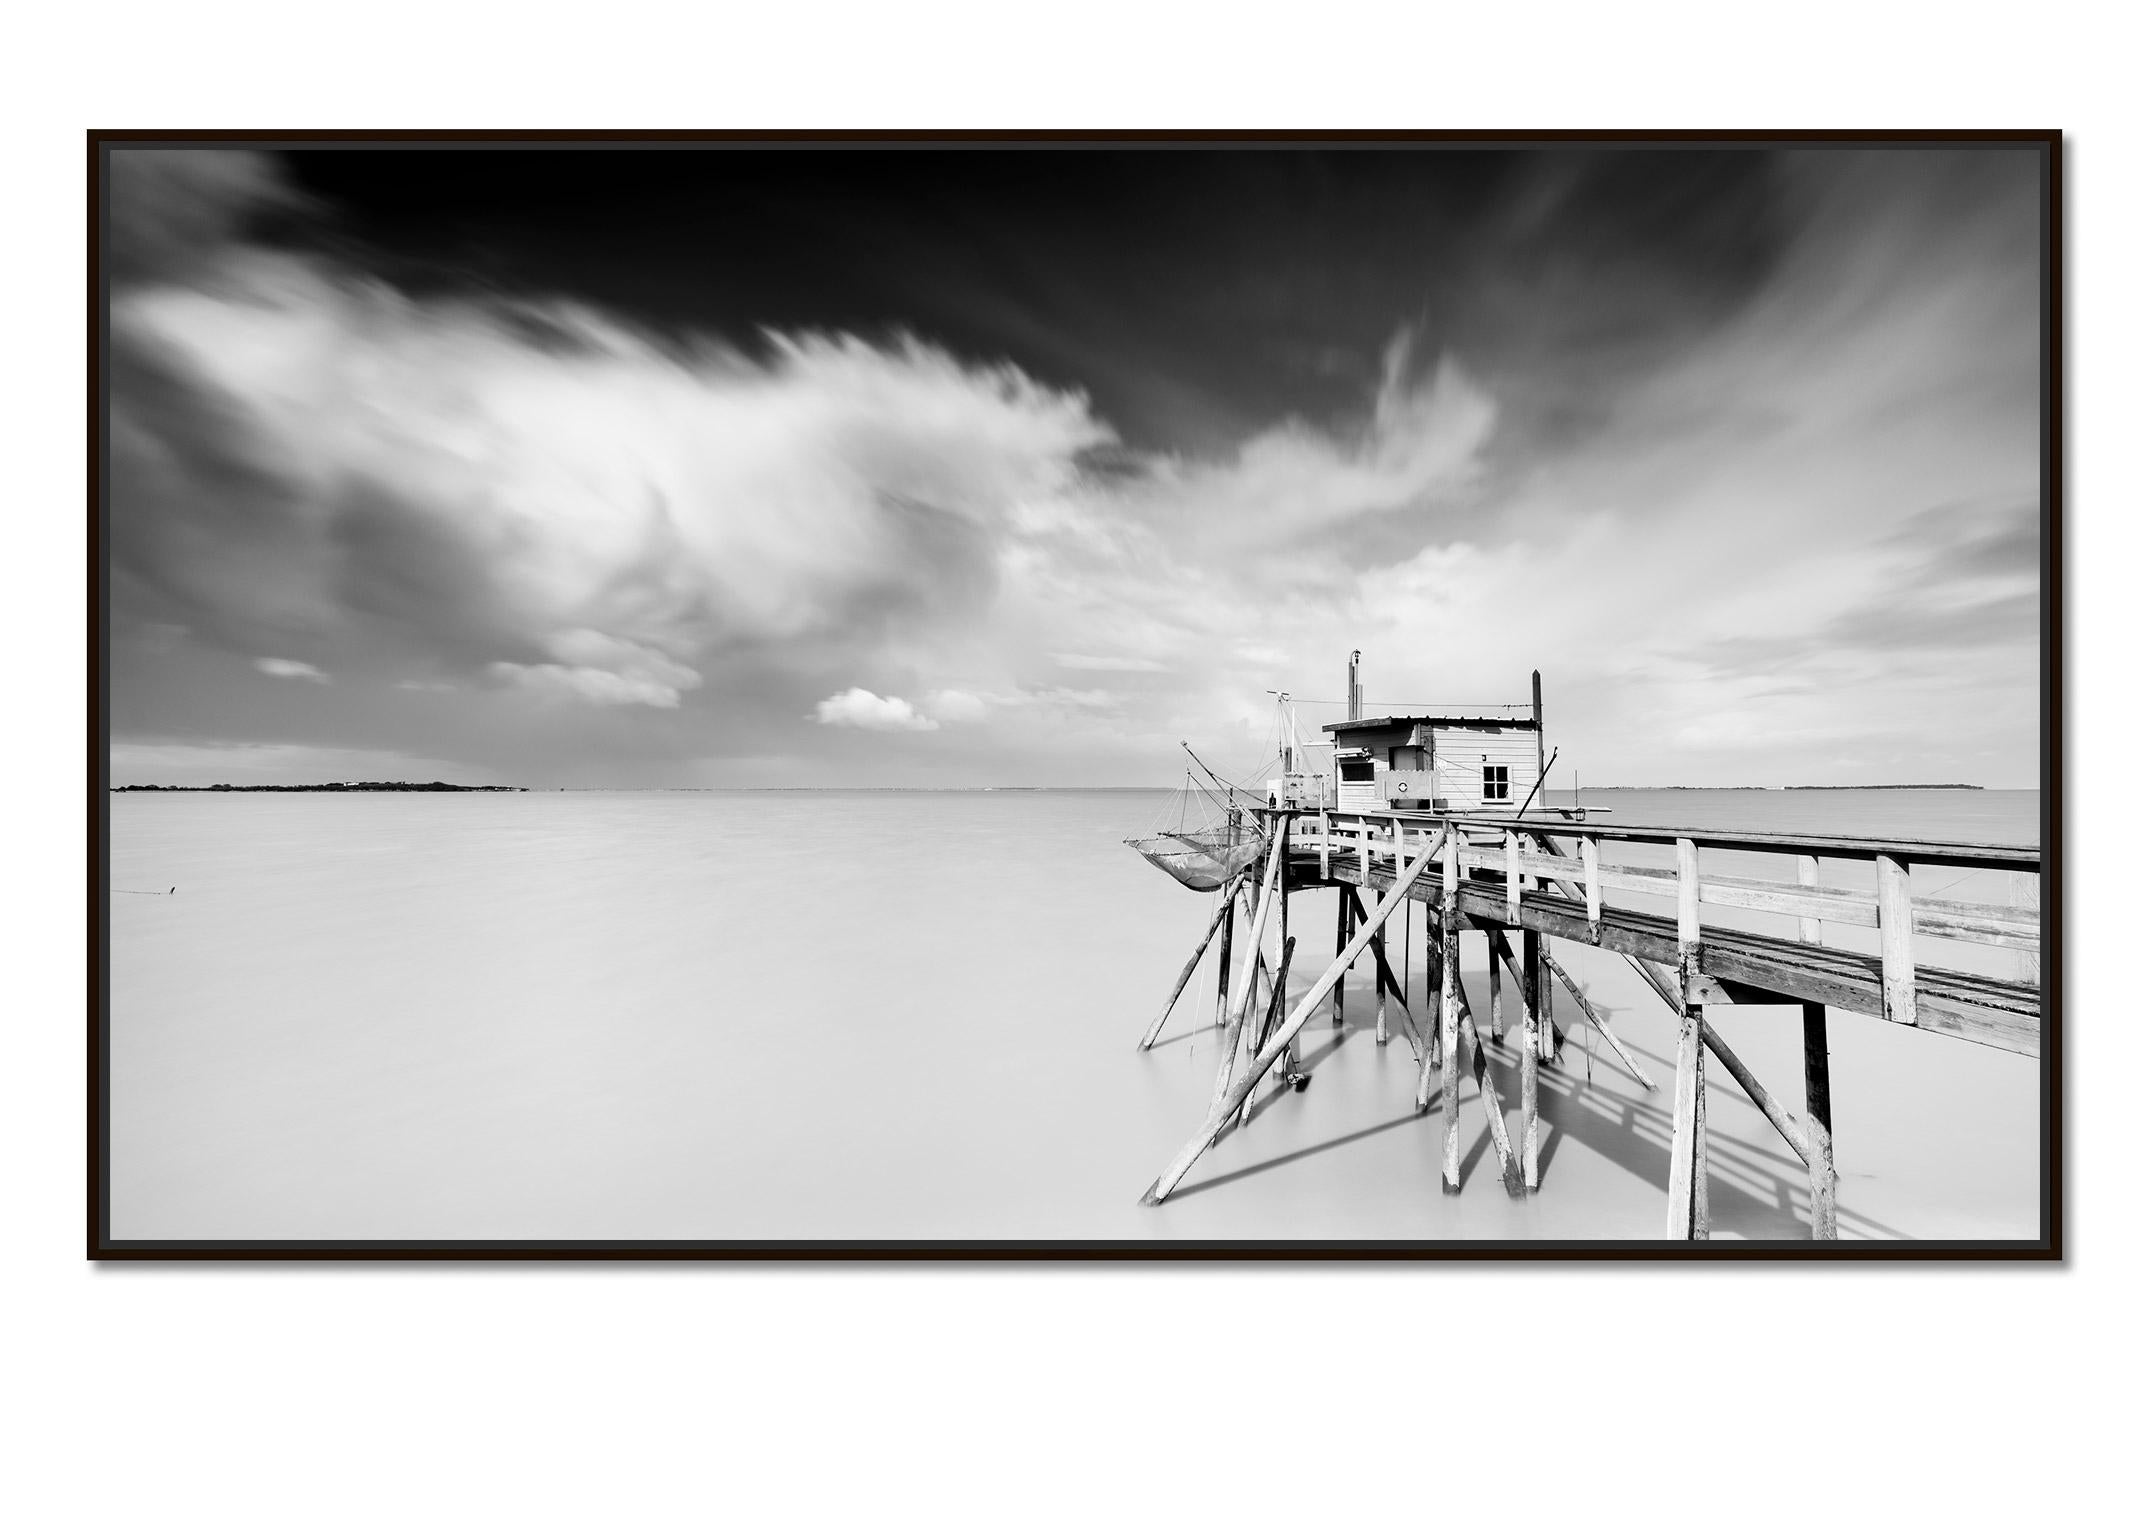 Fishing Hut on Stilts, Panorama, giant Clouds, fine art landscape photography - Photograph by Gerald Berghammer